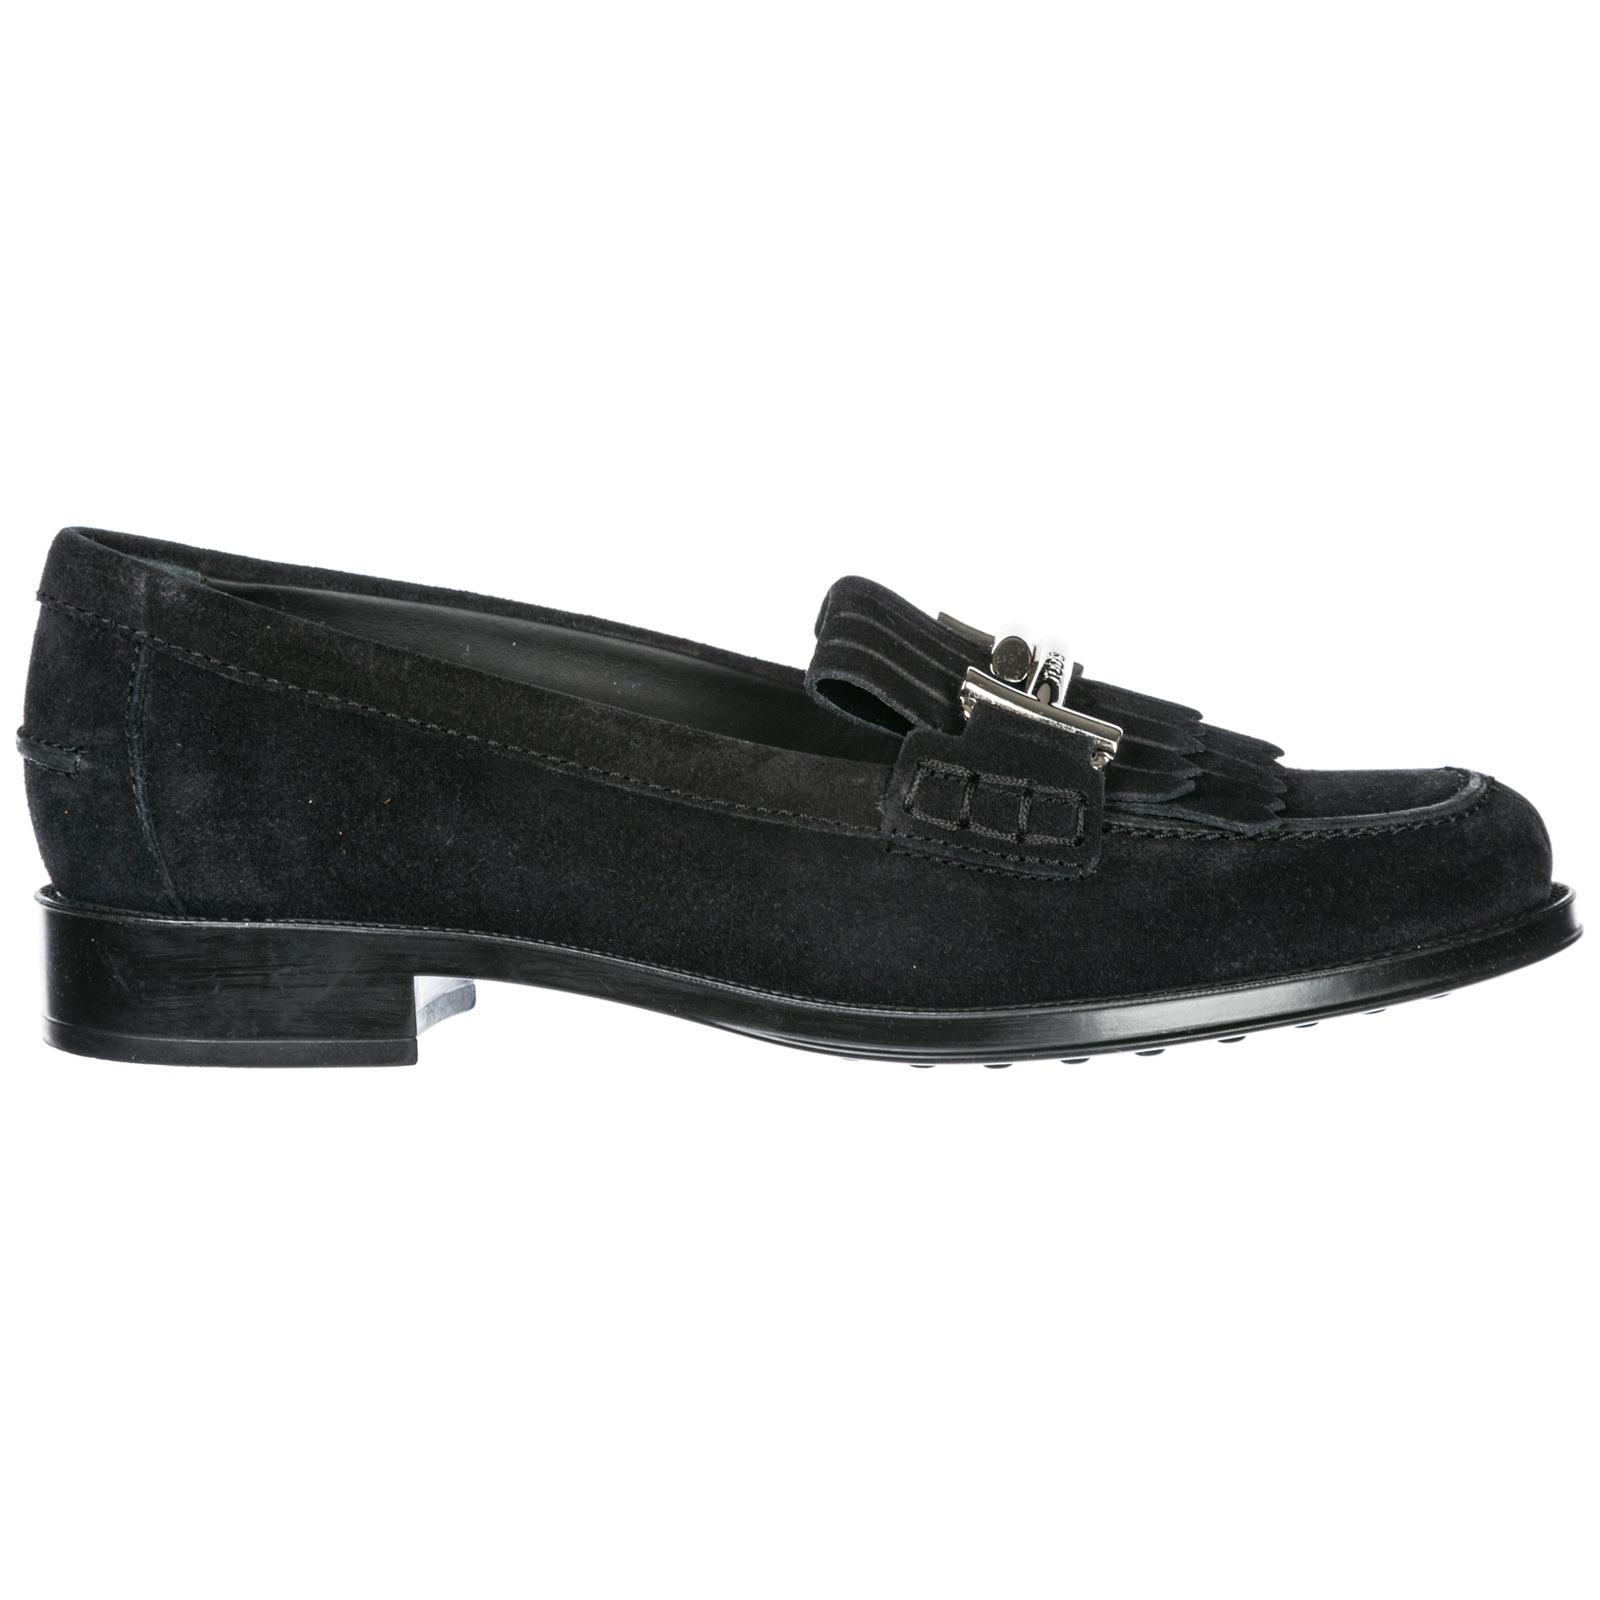 Tod's Women's Suede Loafers Moccasins Double T in Nero (Black) - Lyst